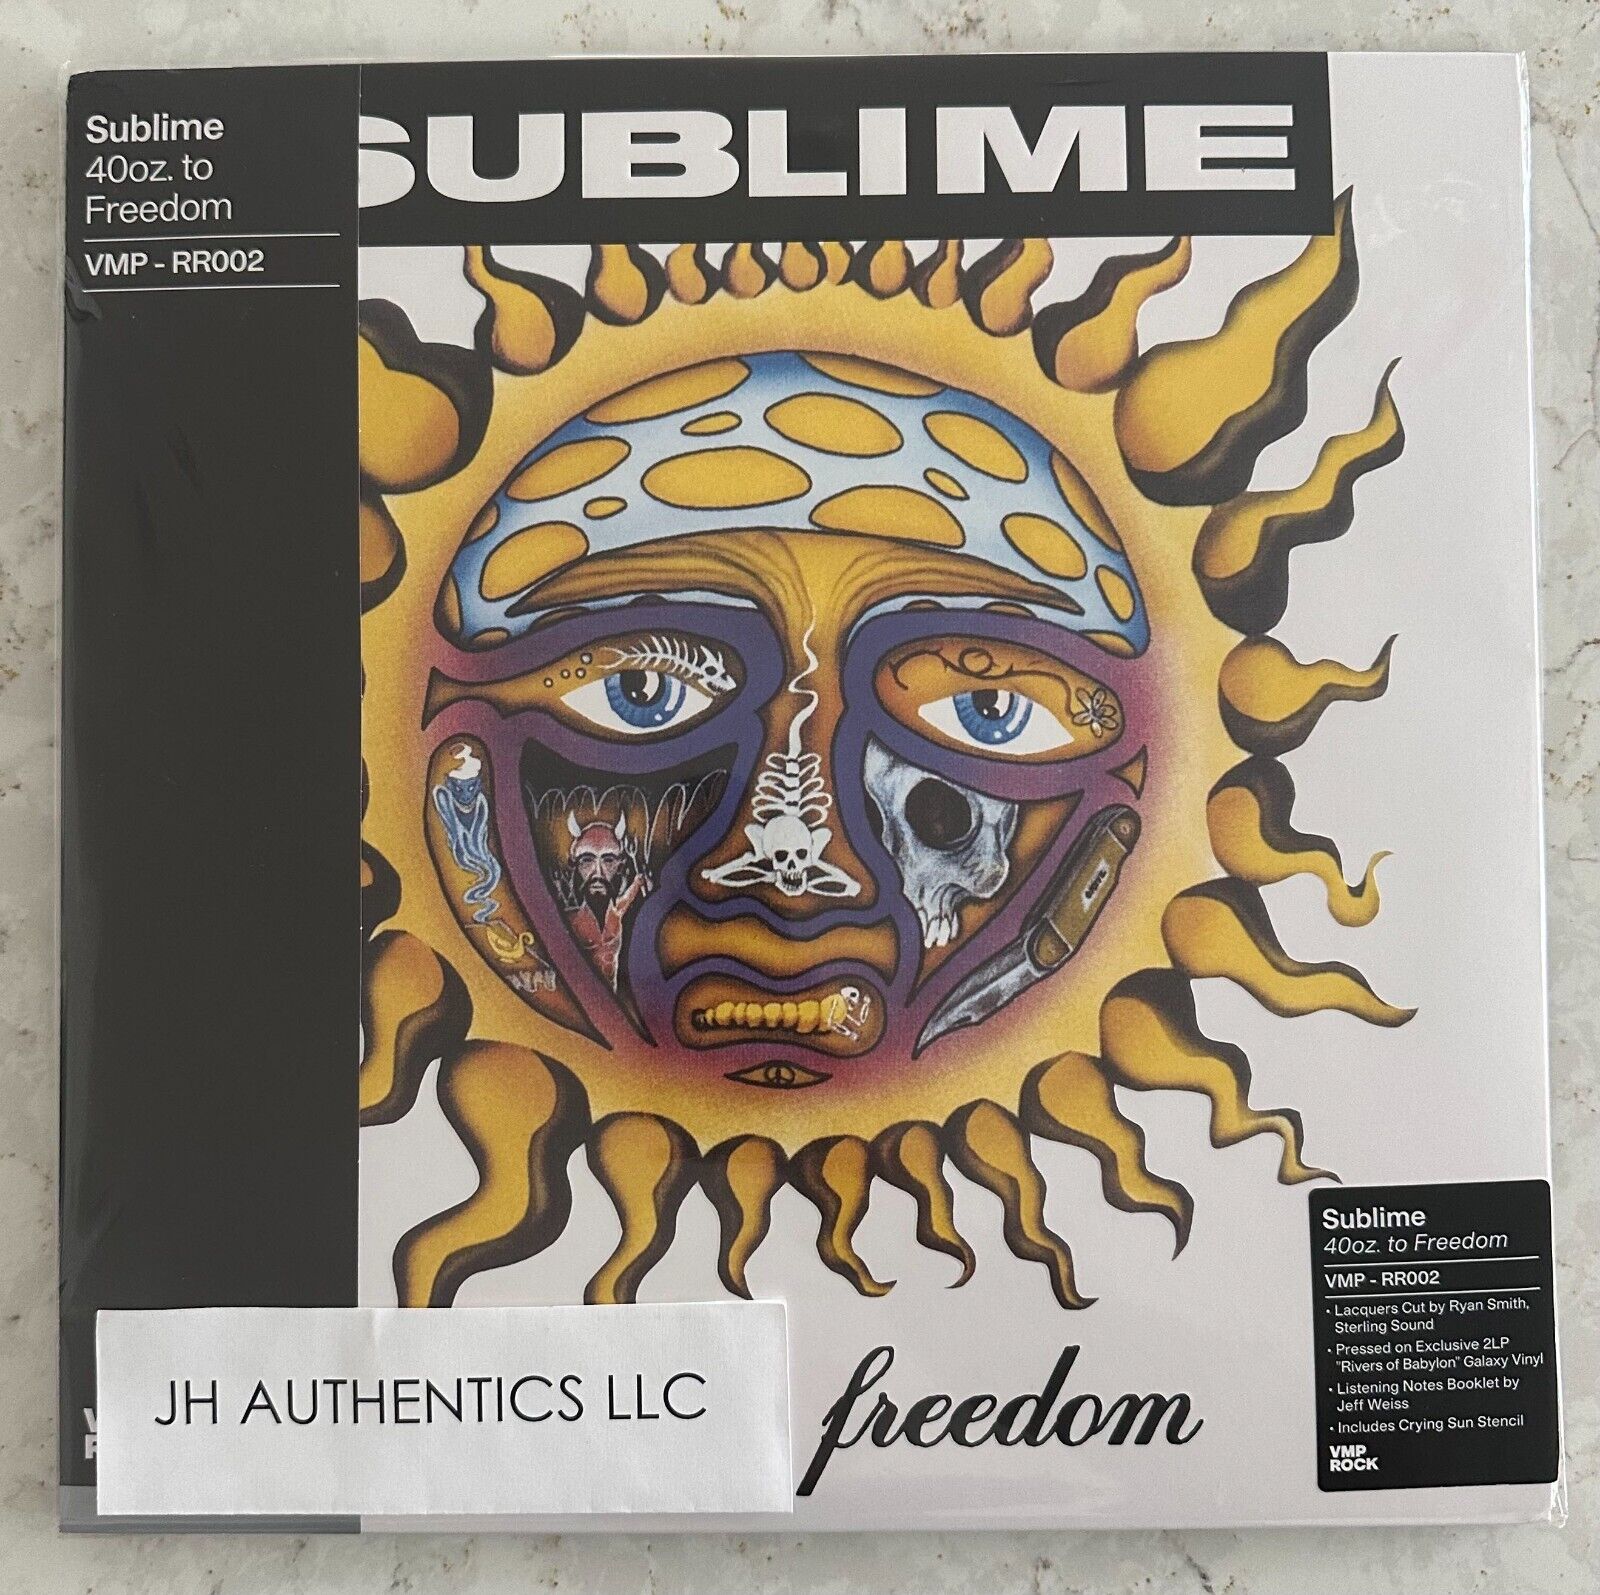 ⚡FAST SHIP⚡ SUBLIME 40oz. to Freedom 2LP  Galaxy Vinyl Limited